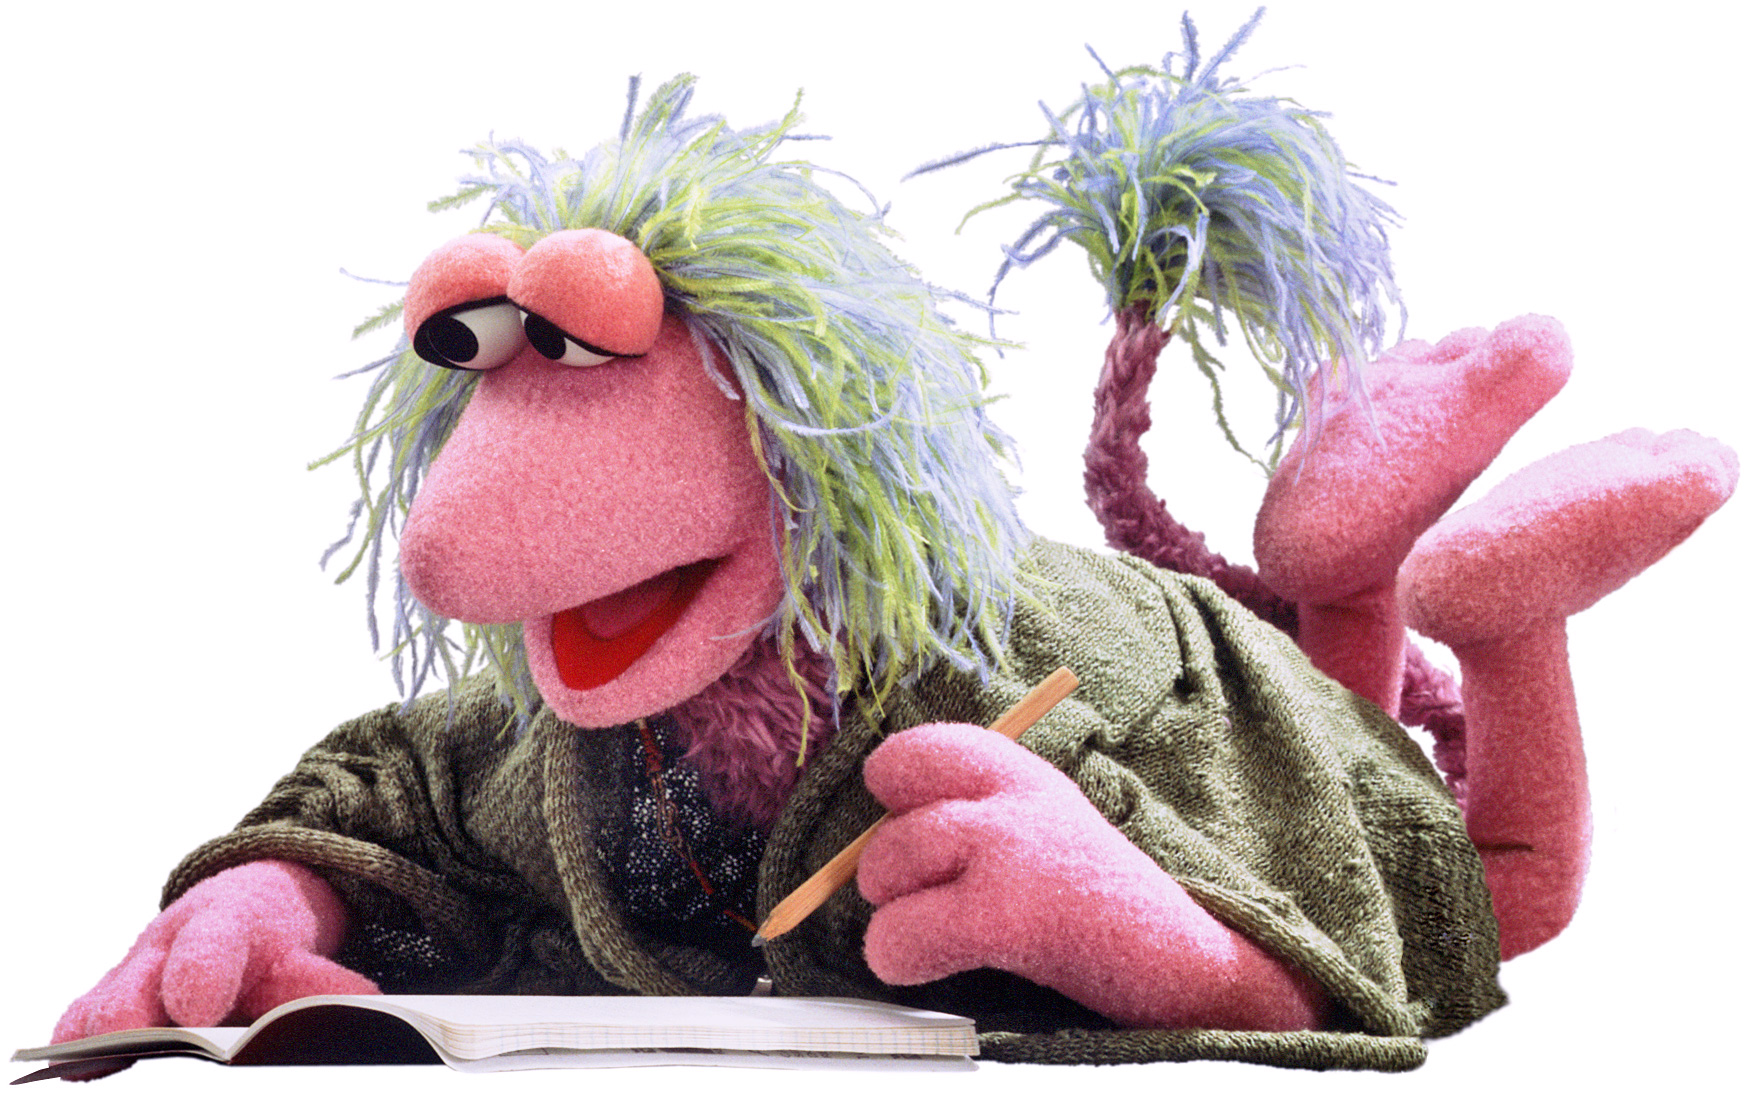 Fraggle Rock: Back to the Rock - Wikipedia